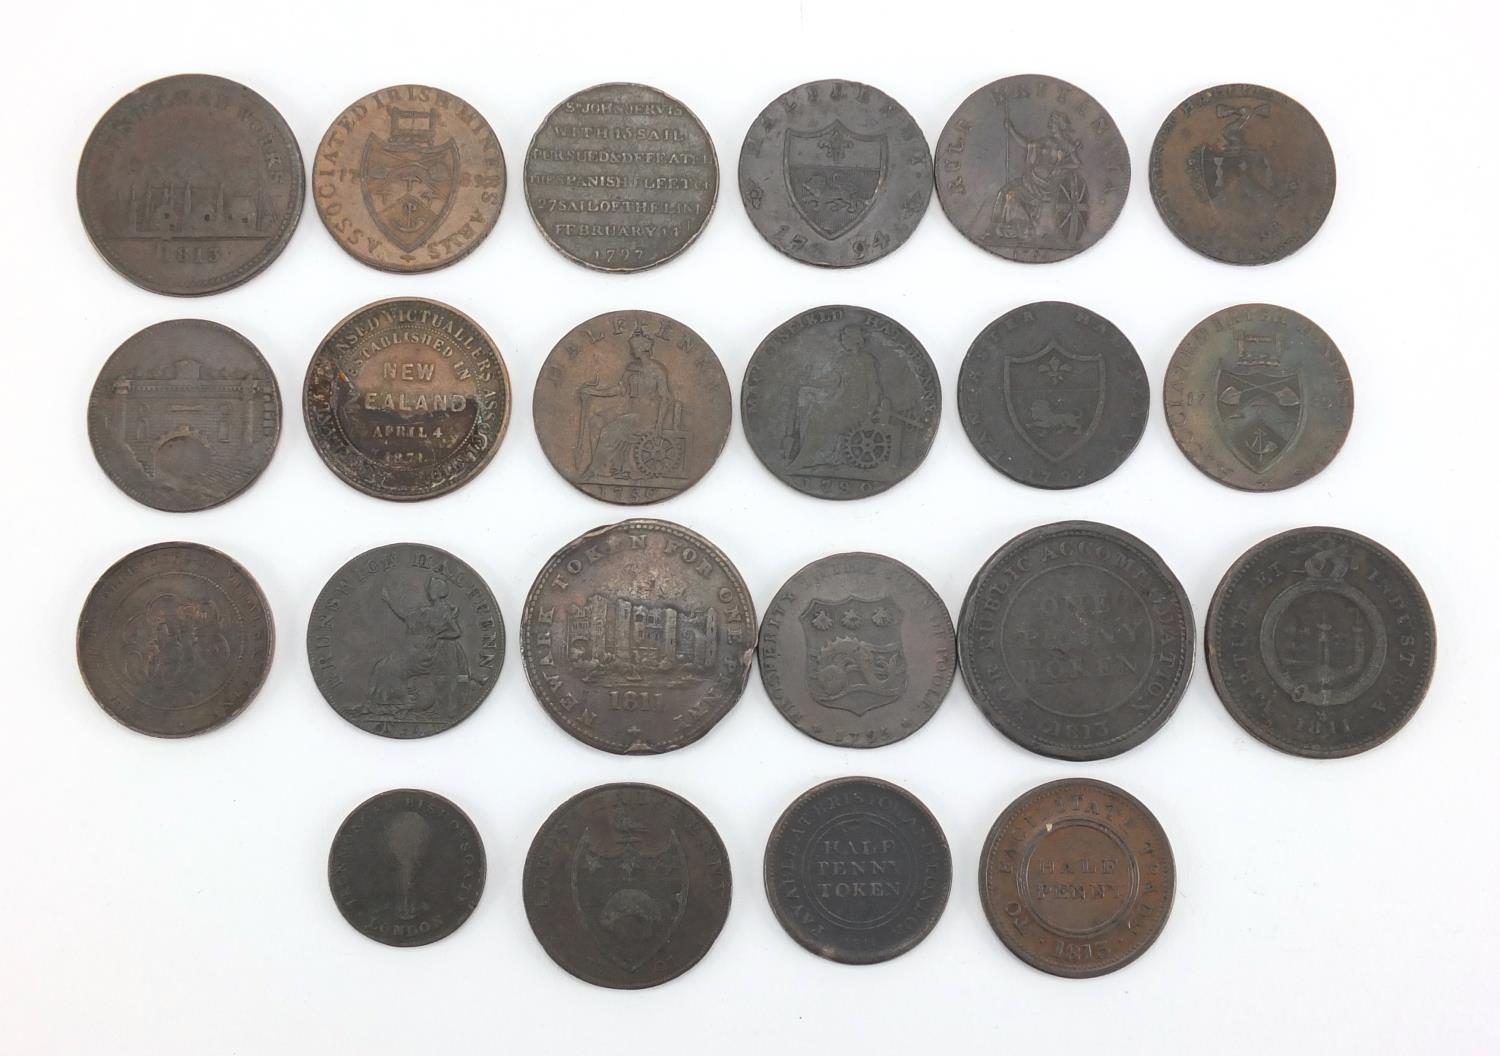 Twenty two late 18th early 19th century tokens and half pennies including Iohn of Gaunt Duke of - Image 6 of 10